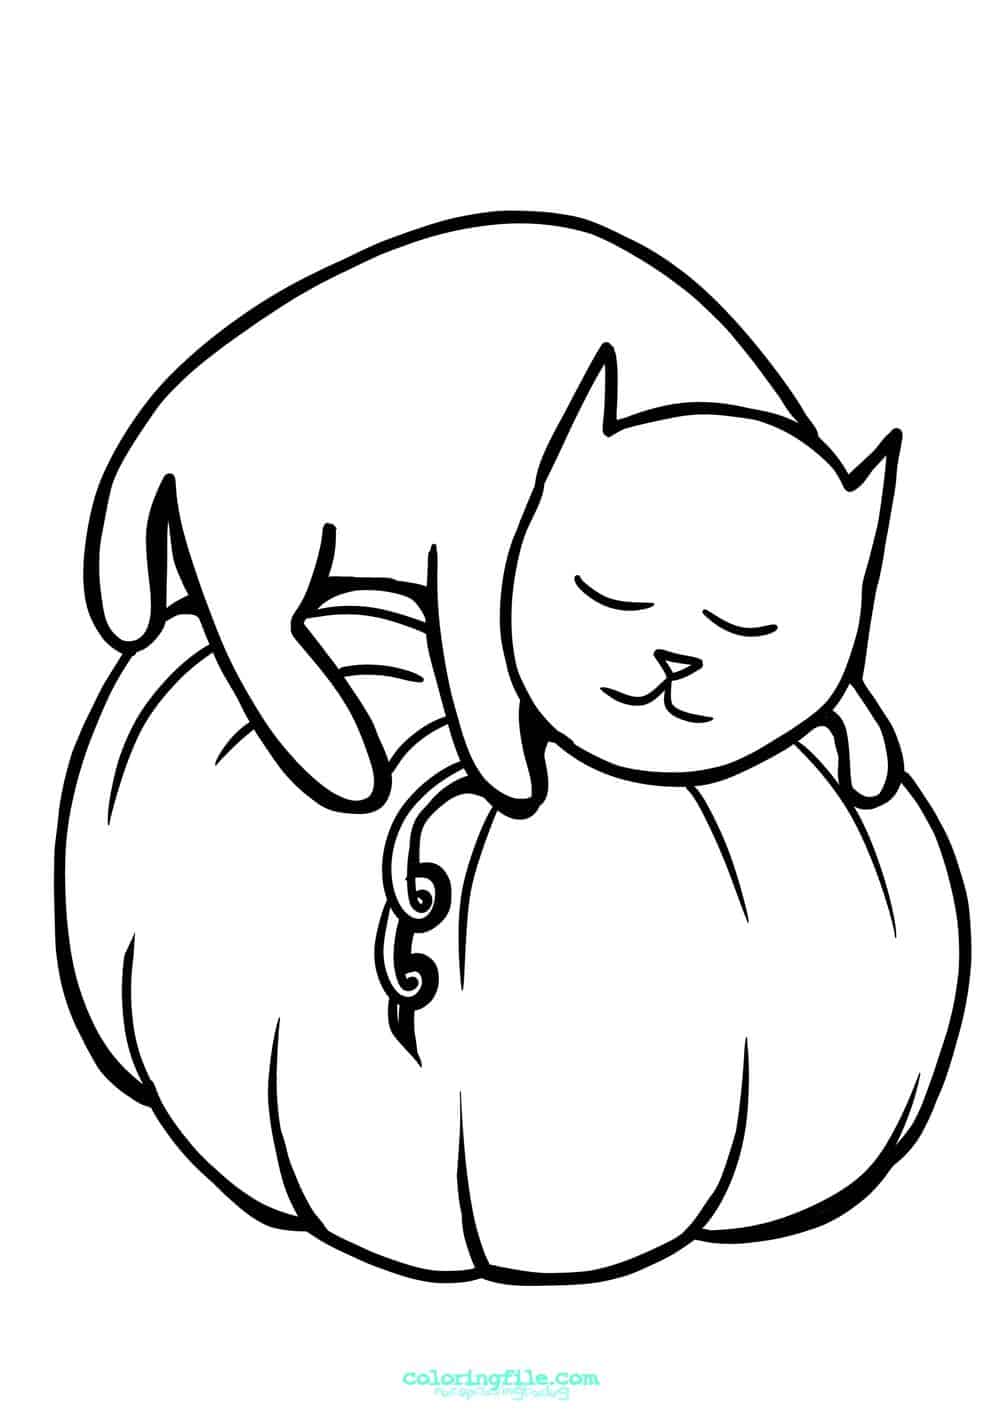 Cat nap on a pumpkin halloween coloring pages